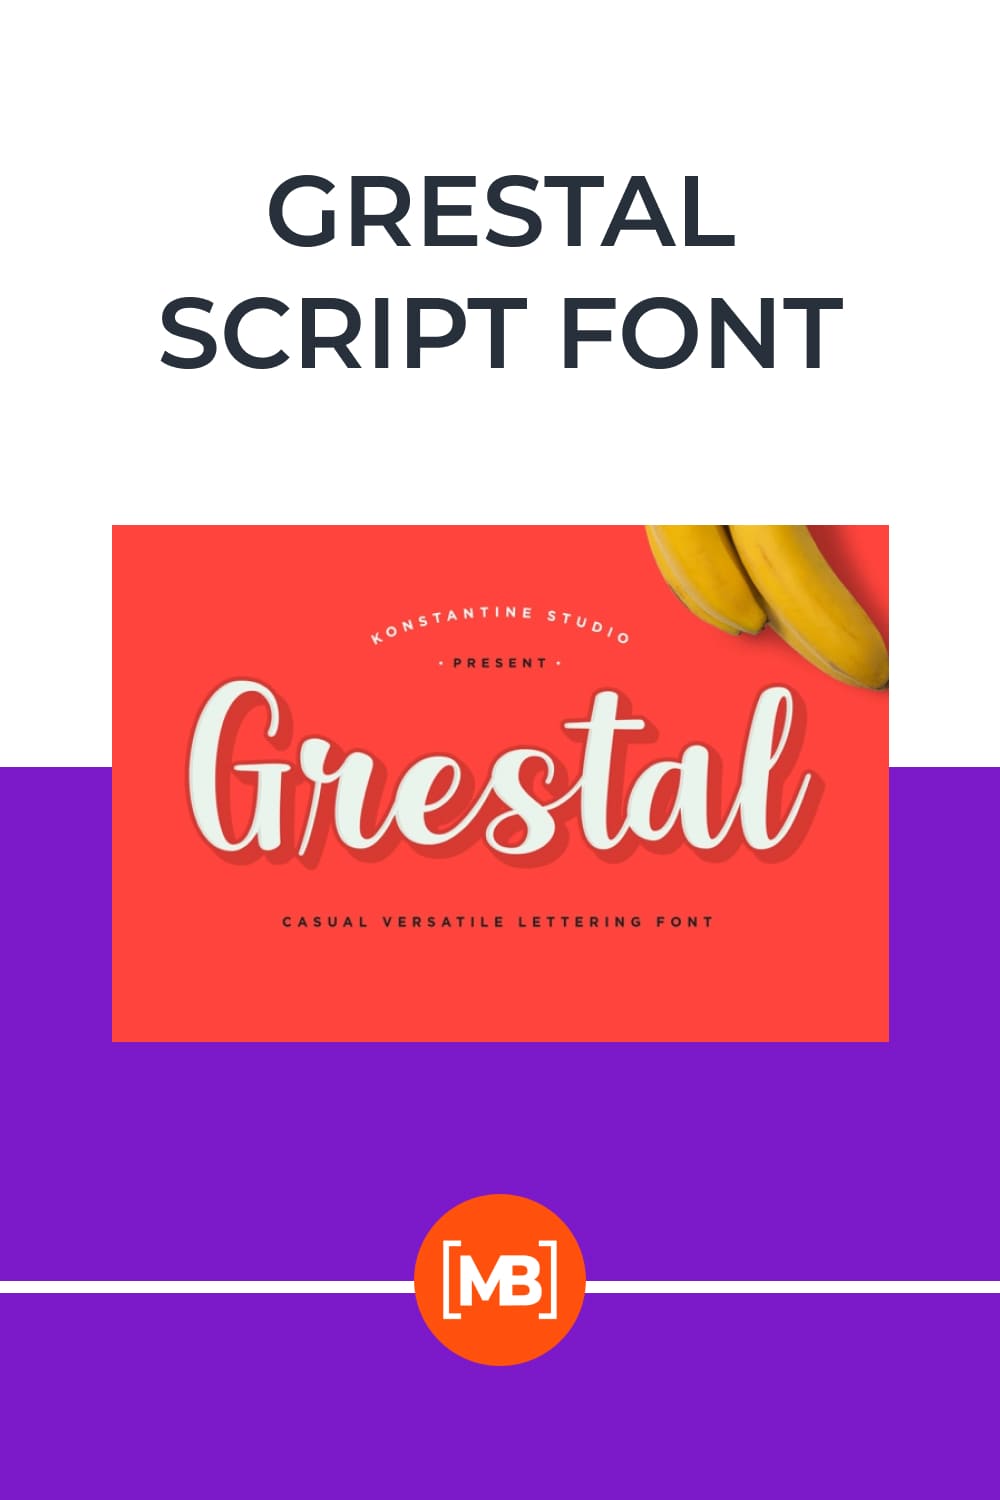 Bold and bright modern font.